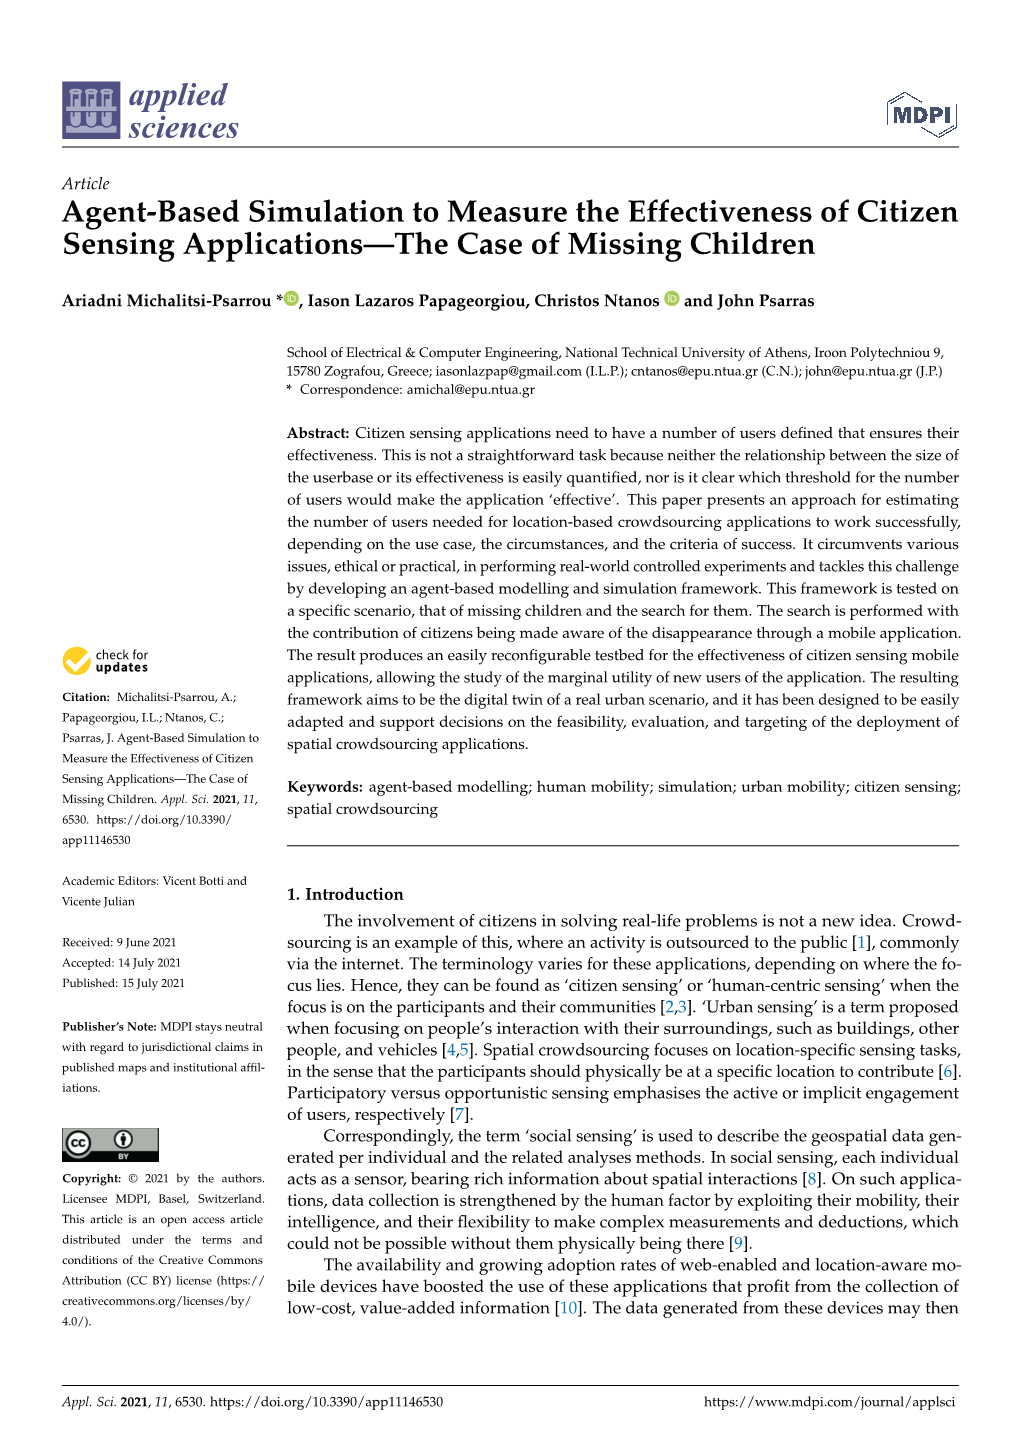 Agent-Based Simulation to Measure the Effectiveness of Citizen Sensing Applications—The Case of Missing Children